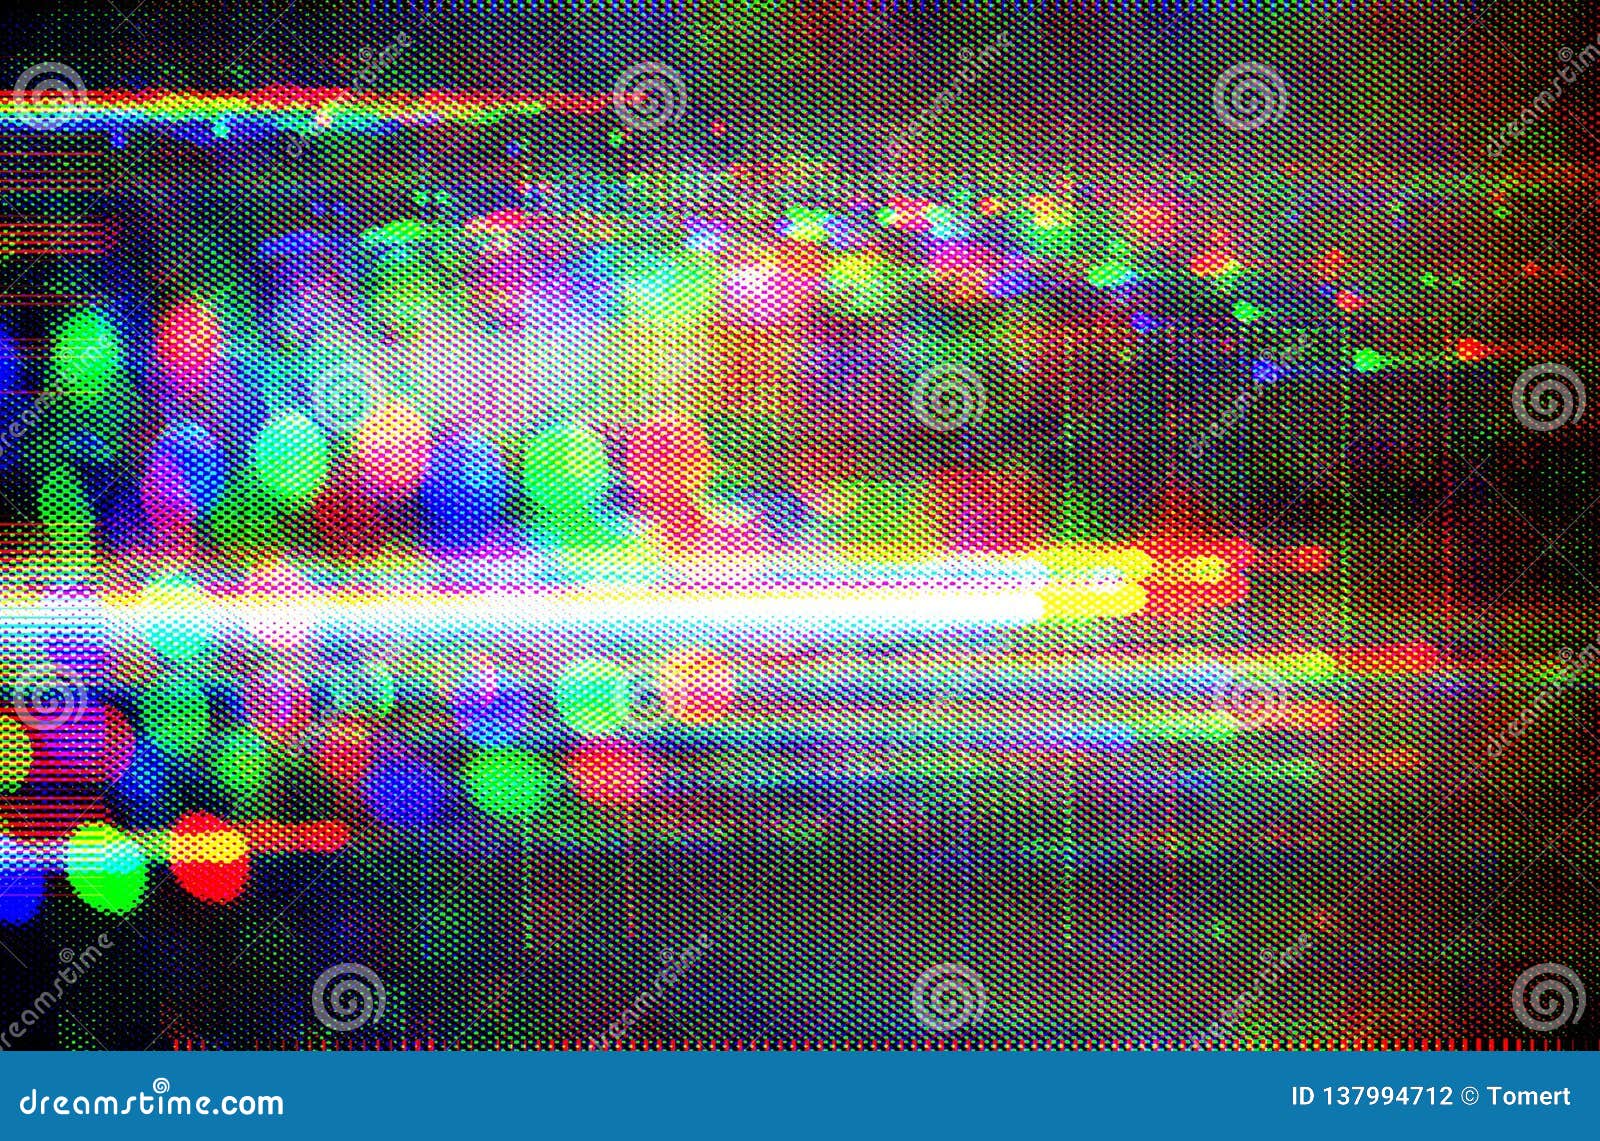 Rainbow Tv Static Photos Free Royalty Free Stock Photos From Dreamstime